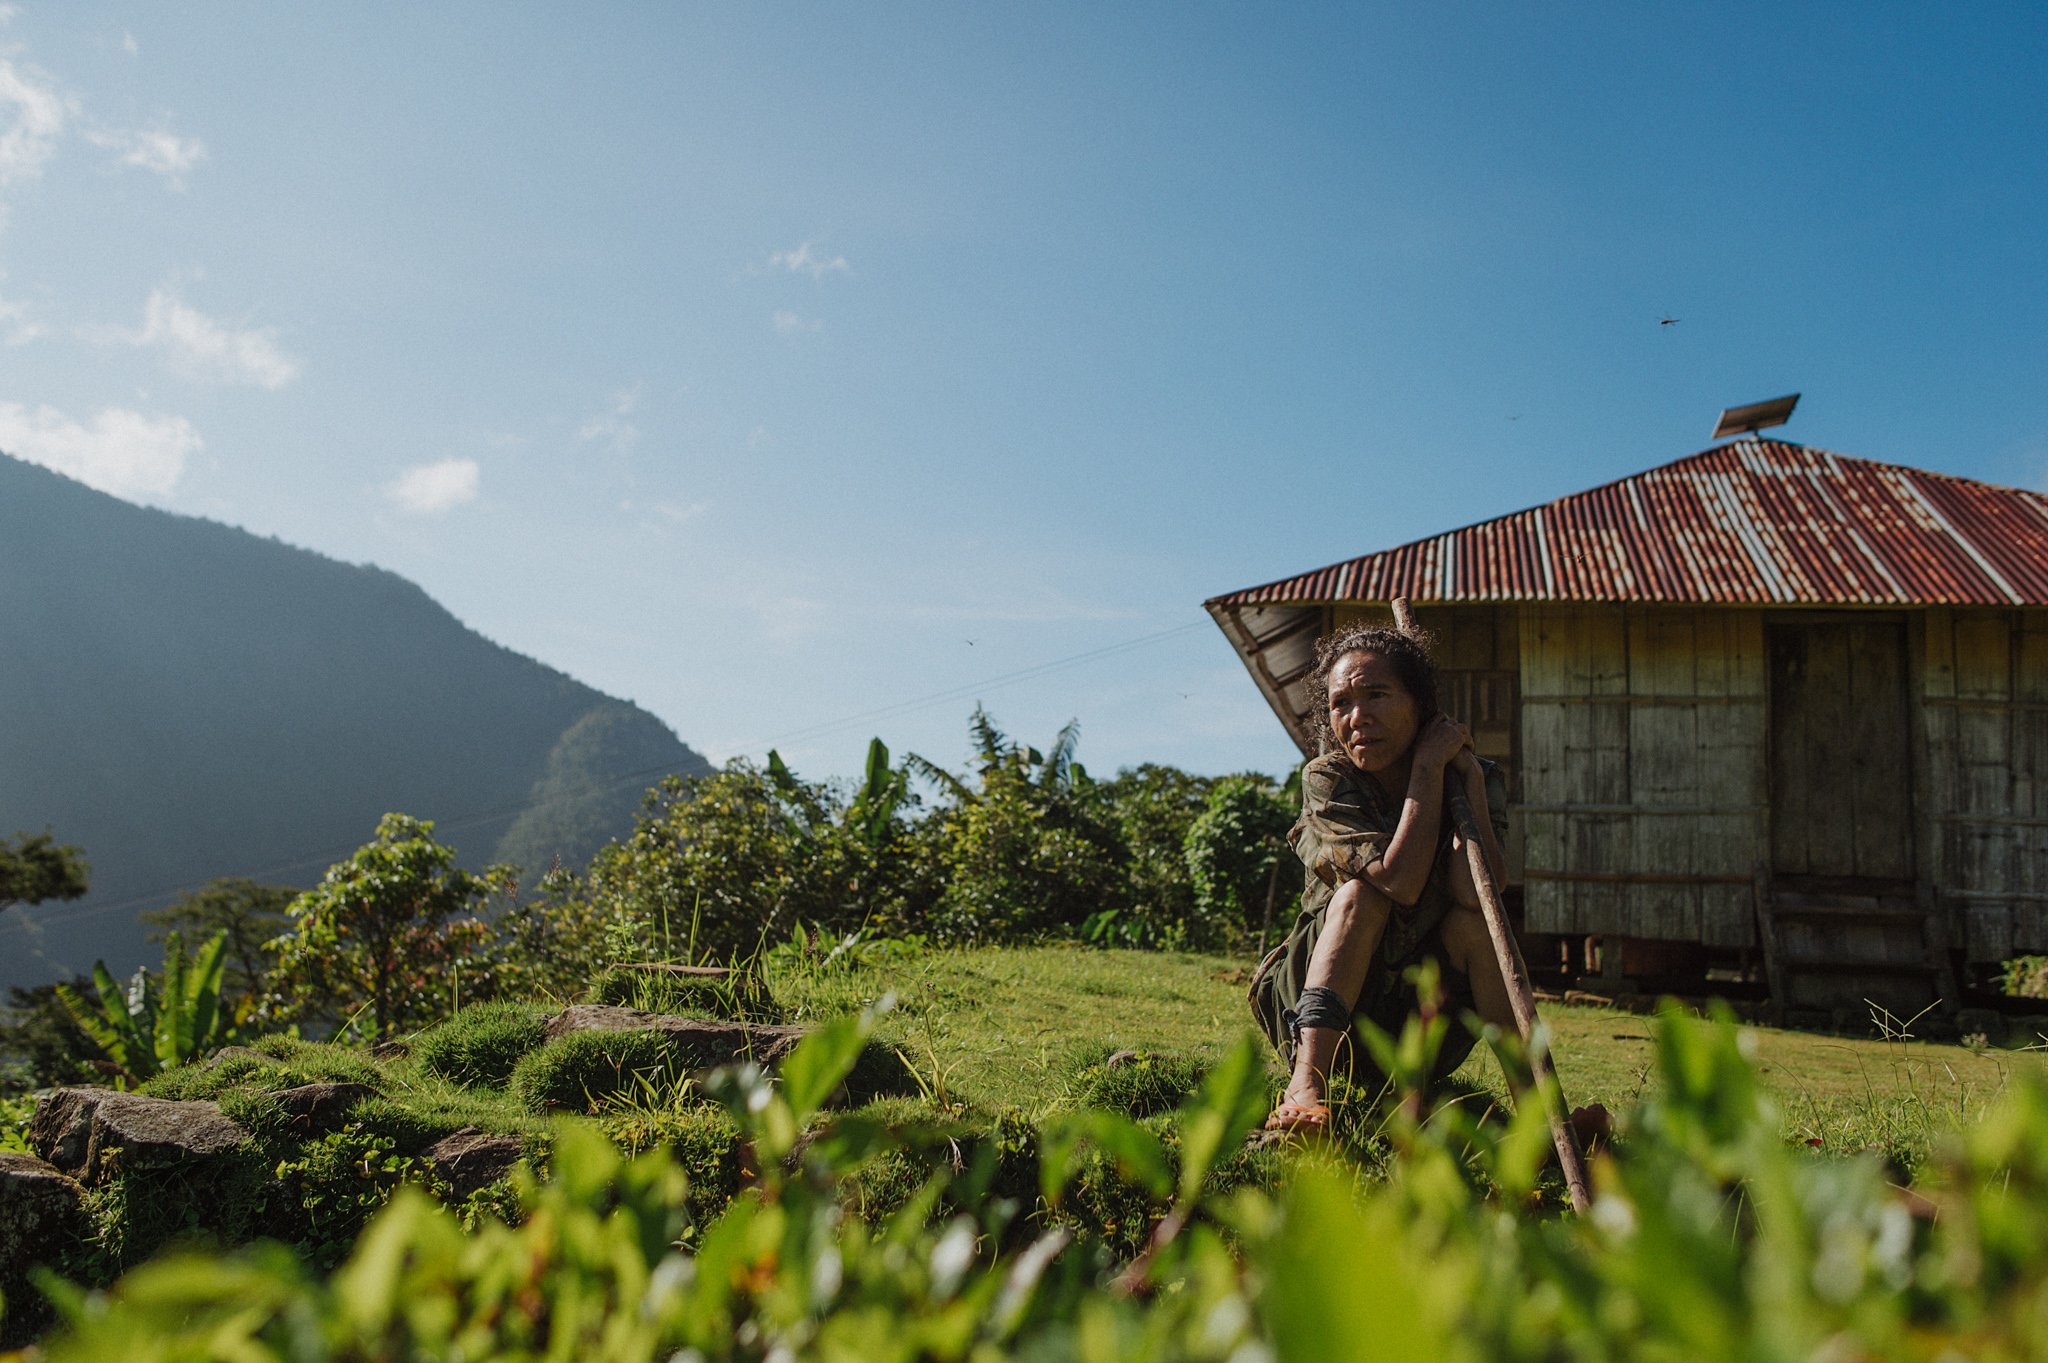 A villager looks out over the view of the valley in Wae Rebo, Indonesia.